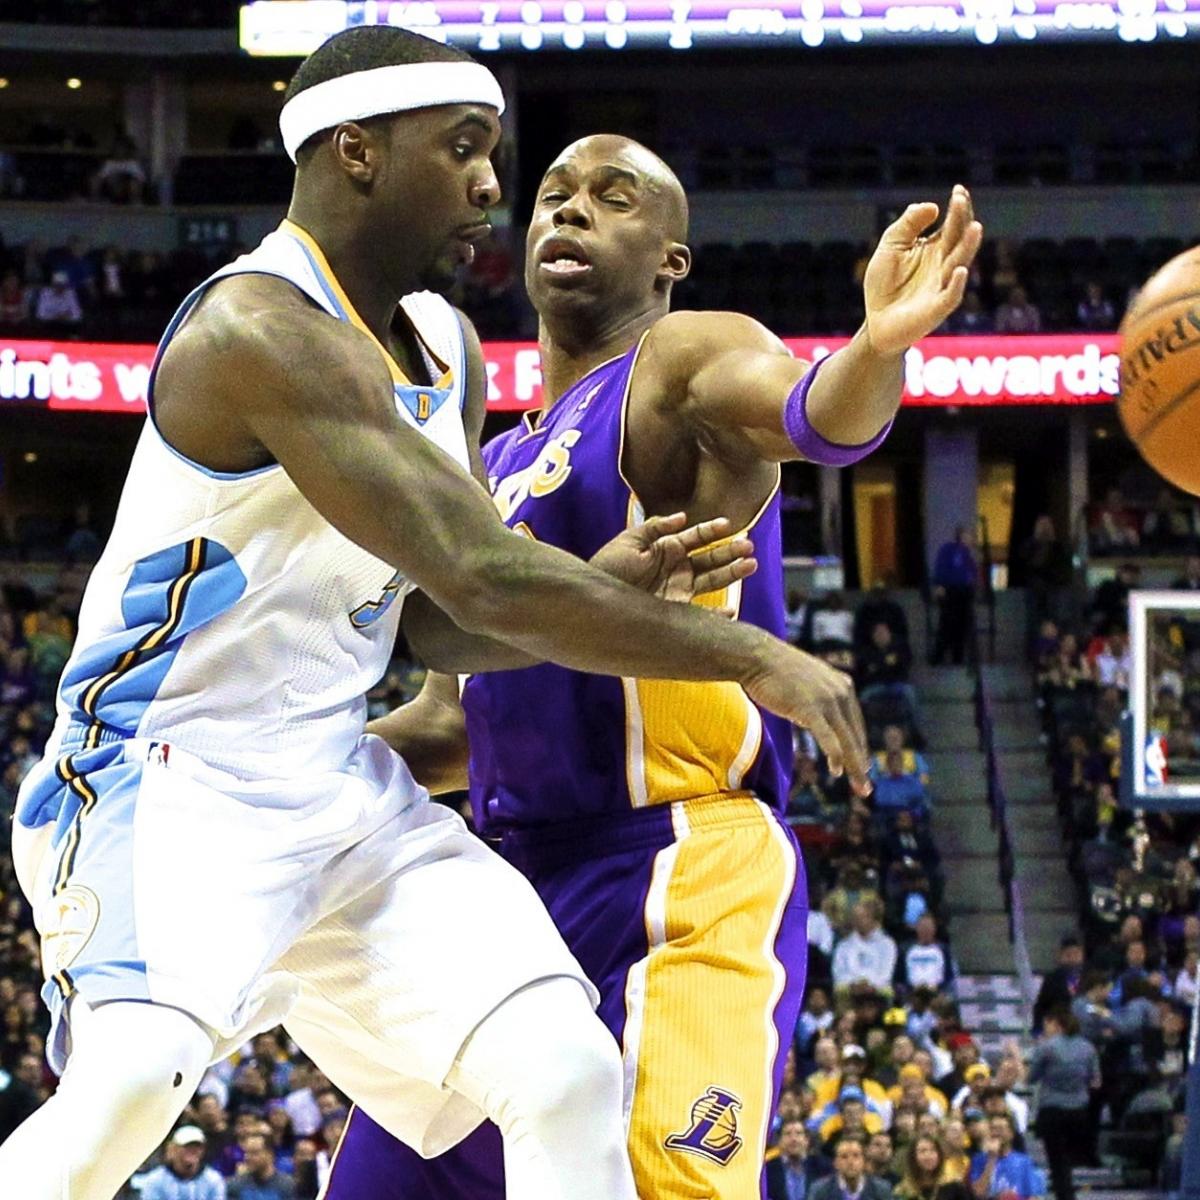 Los Angeles Lakers vs. Denver Nuggets Live Score and Analysis